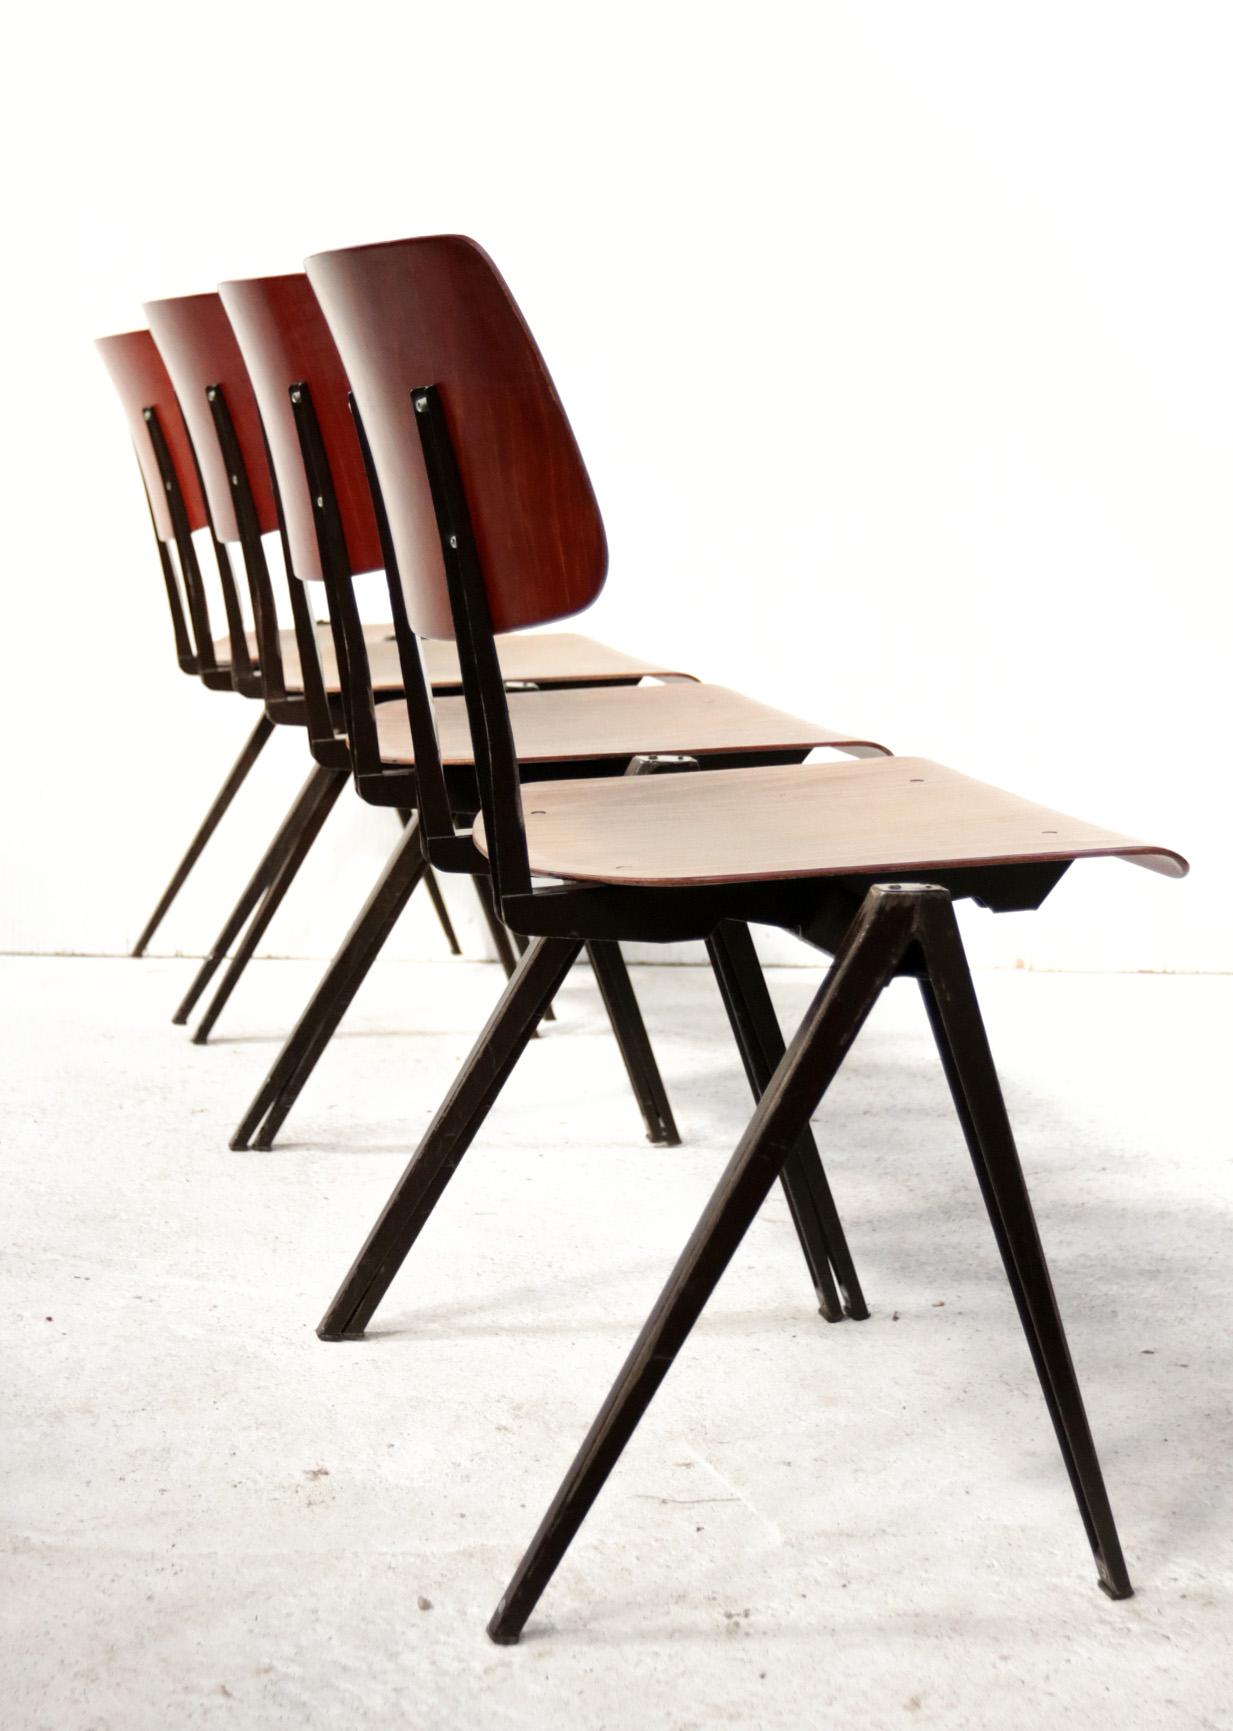 what are school chairs made of